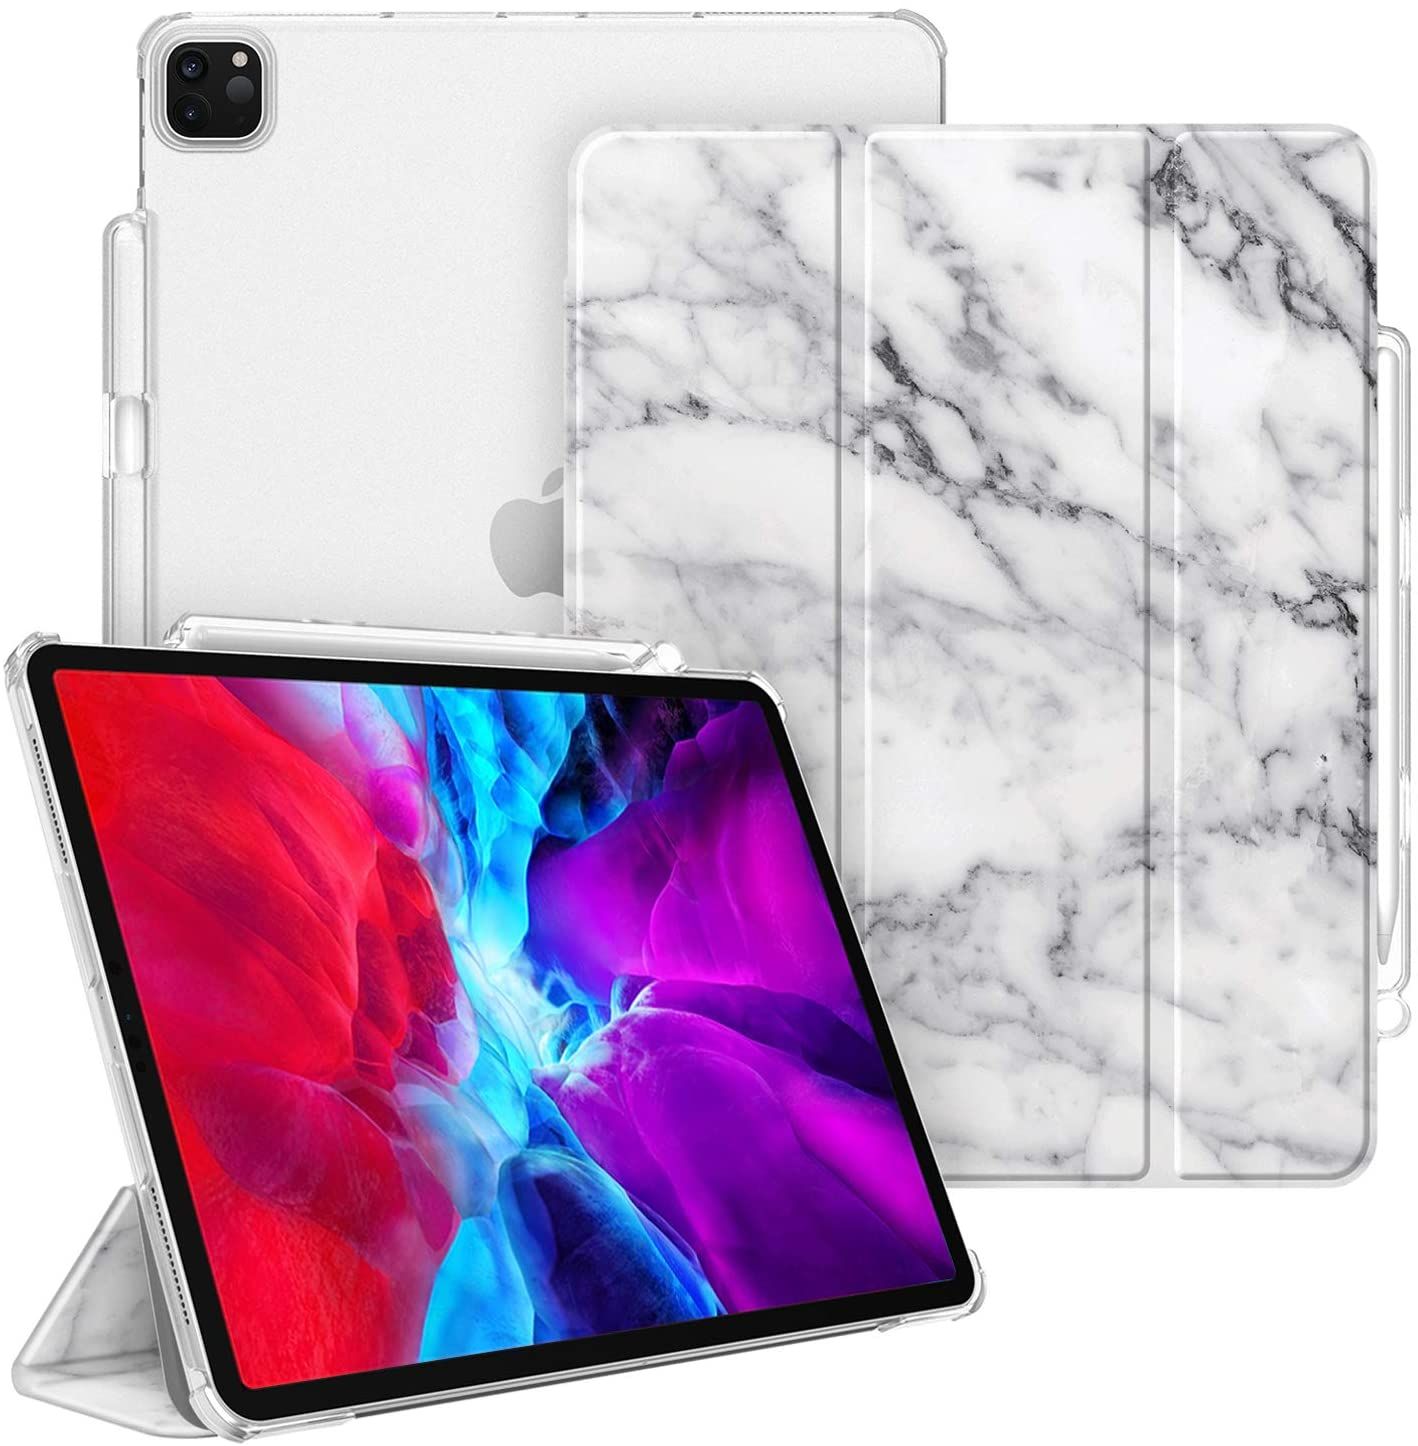 CaseBot SlimShell Case for iPad Pro 12.9 4th & 3rd Generation 1